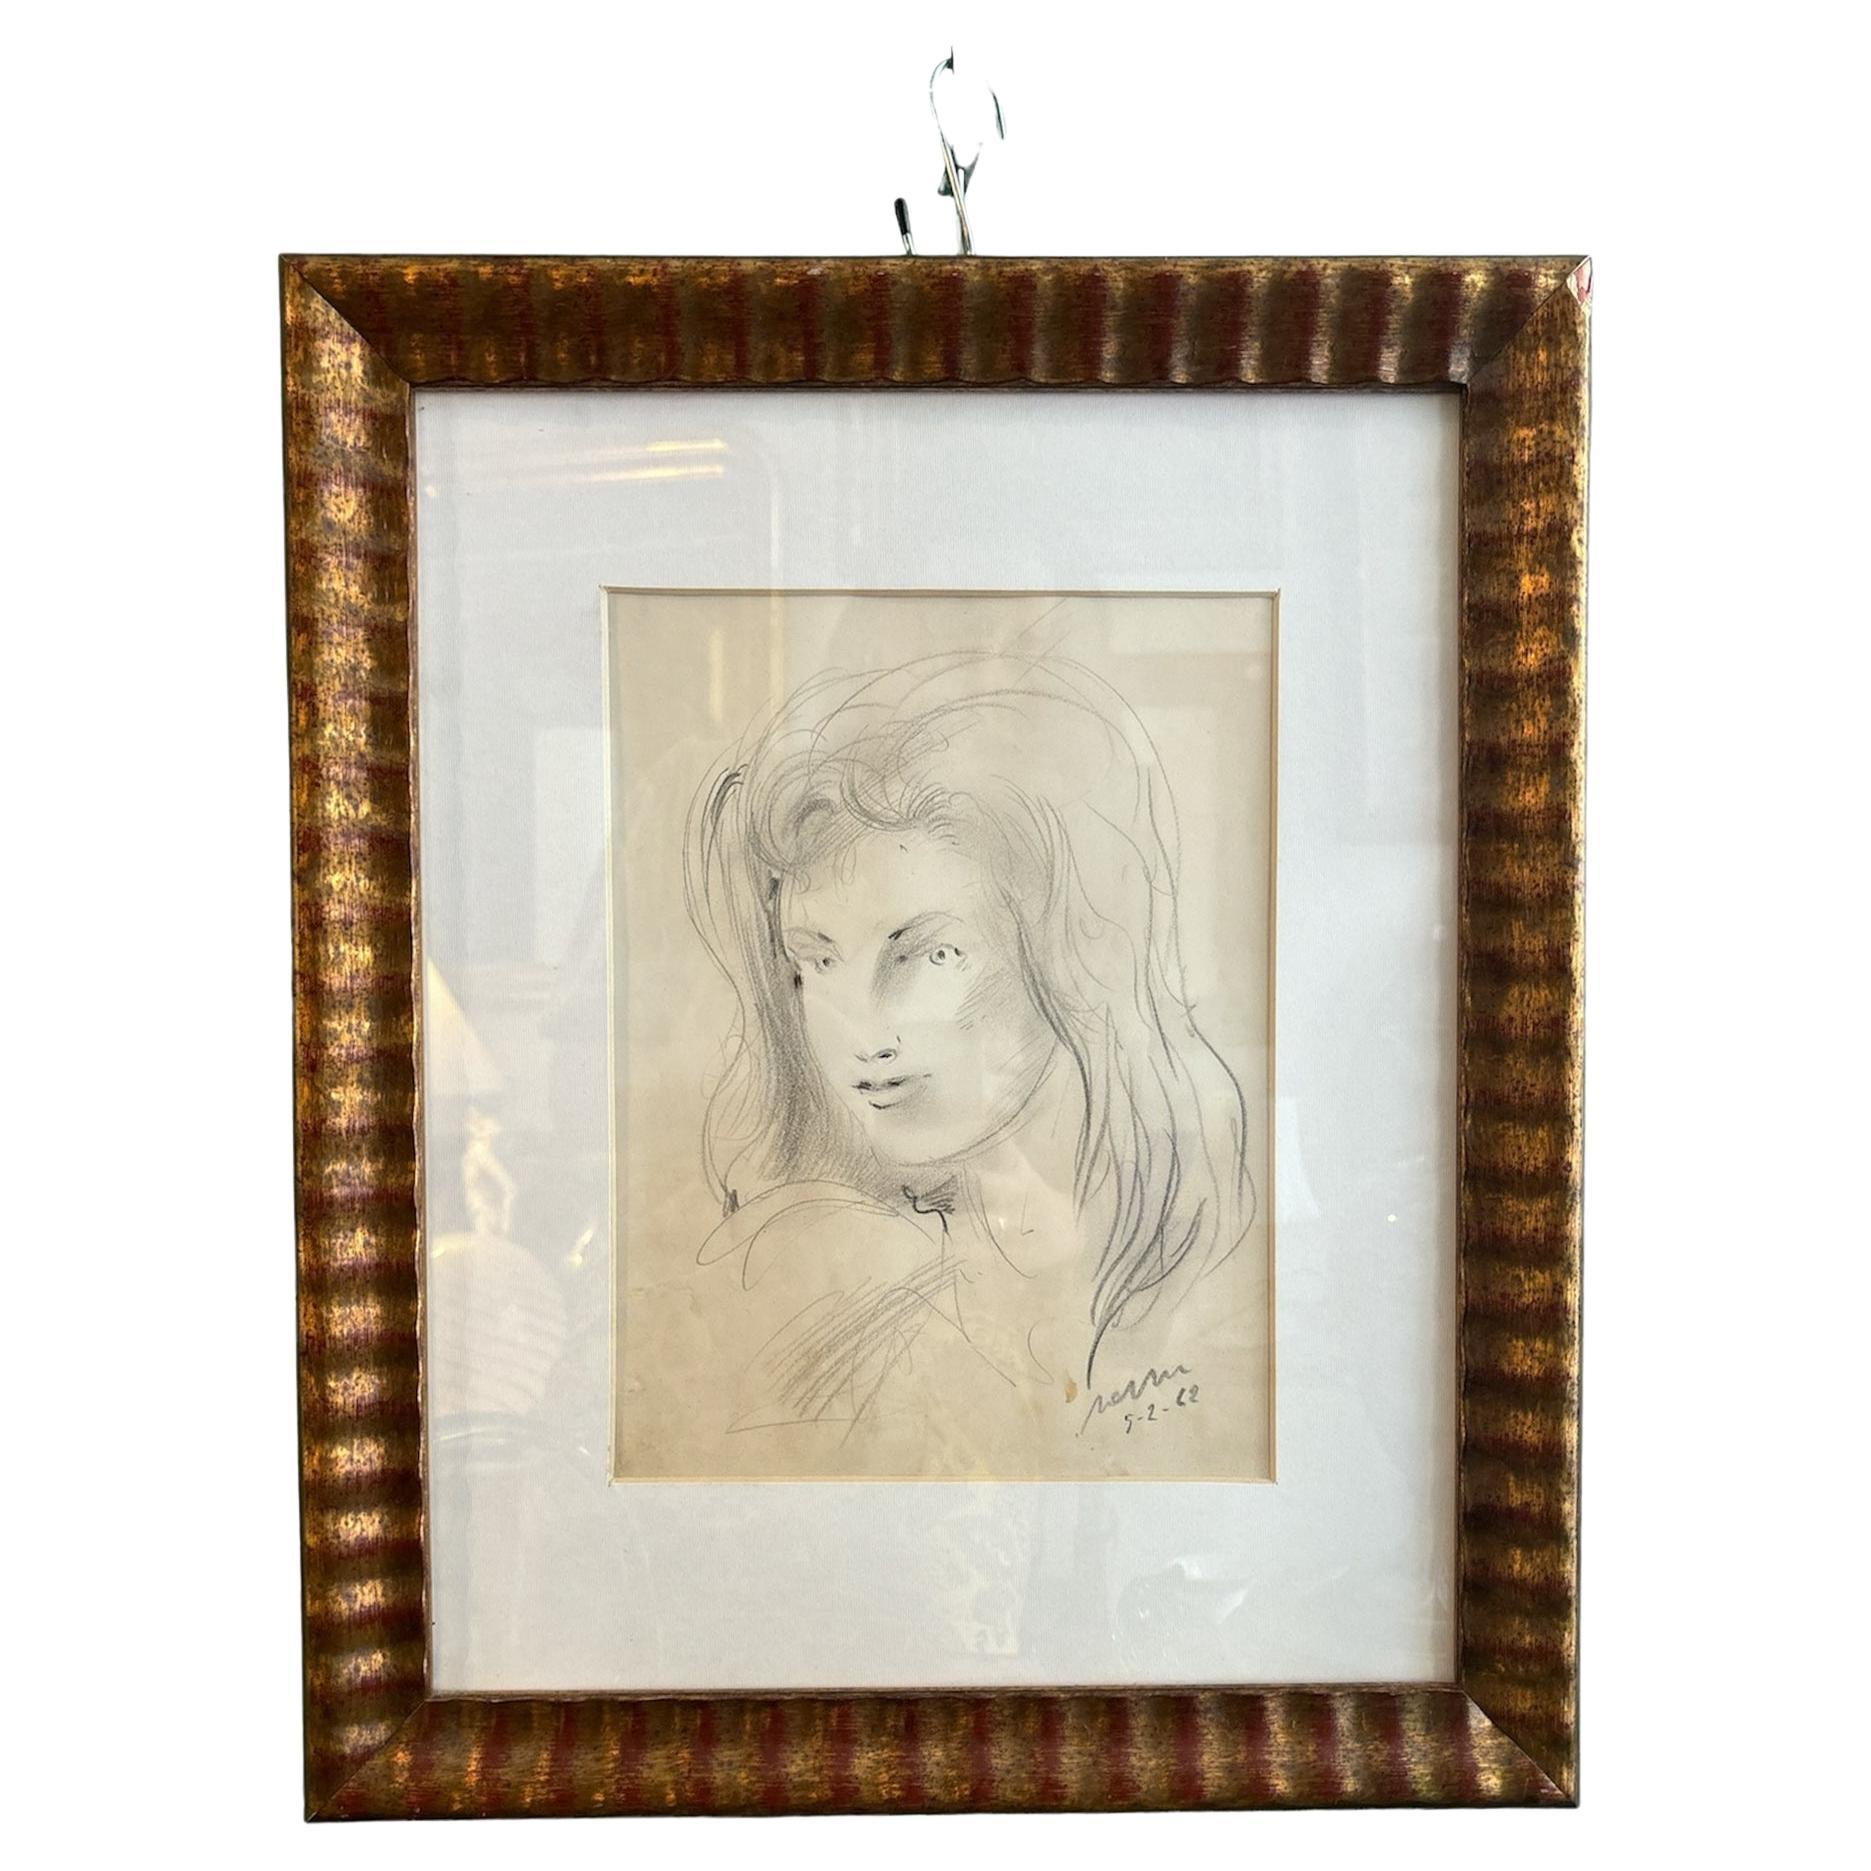 Pencil Drawing of a Female Portrait of Aligi Sassu from the 1970s